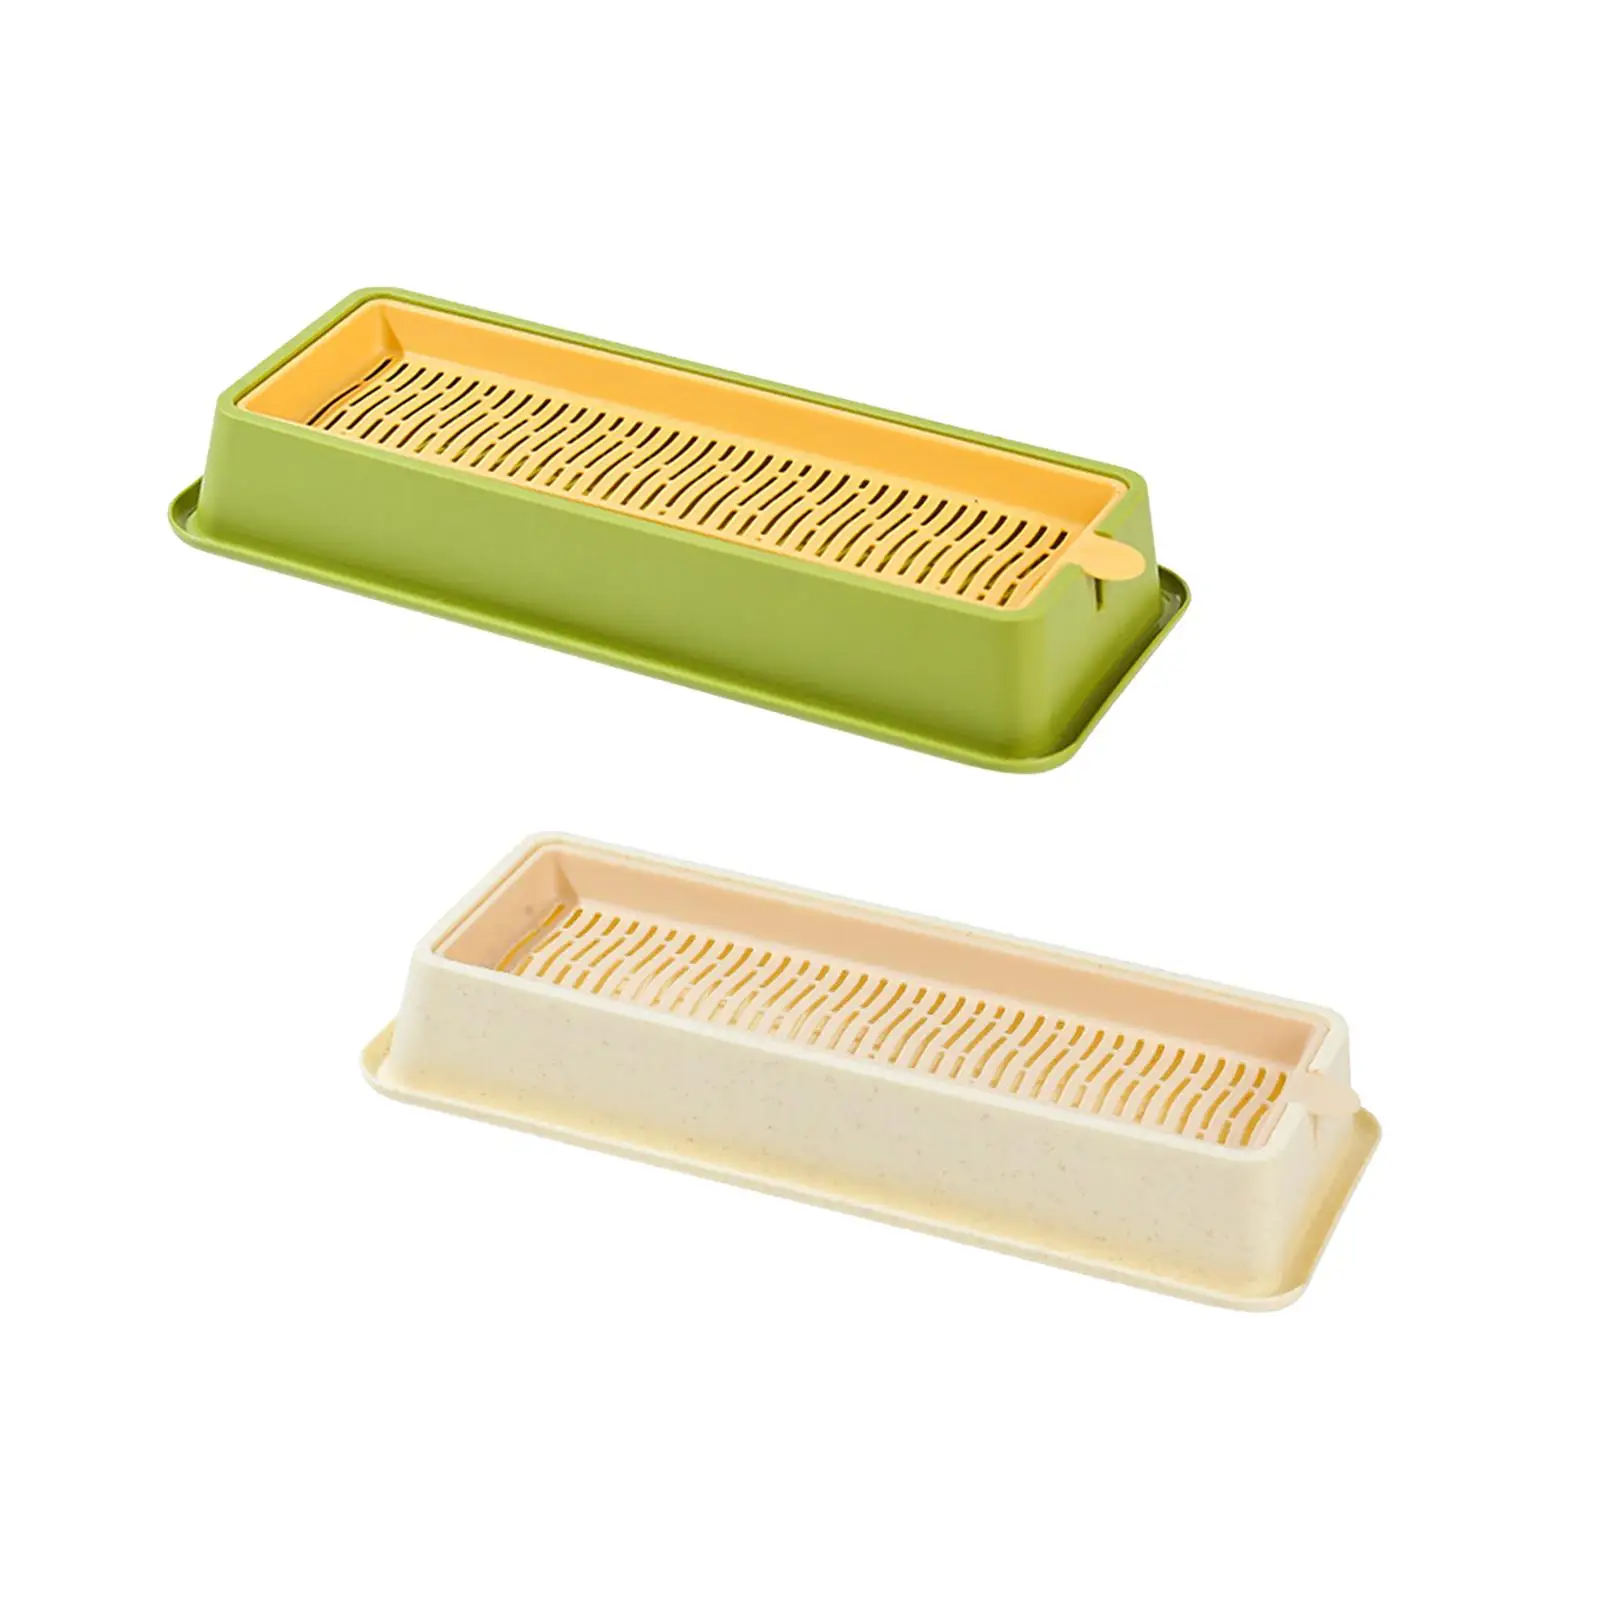 Seed Sprouter Tray Hydroponic Cat Grass Box Soil Free Snack Tray Cat Grass Sprouter Tray for Garden Seedling Planting Home